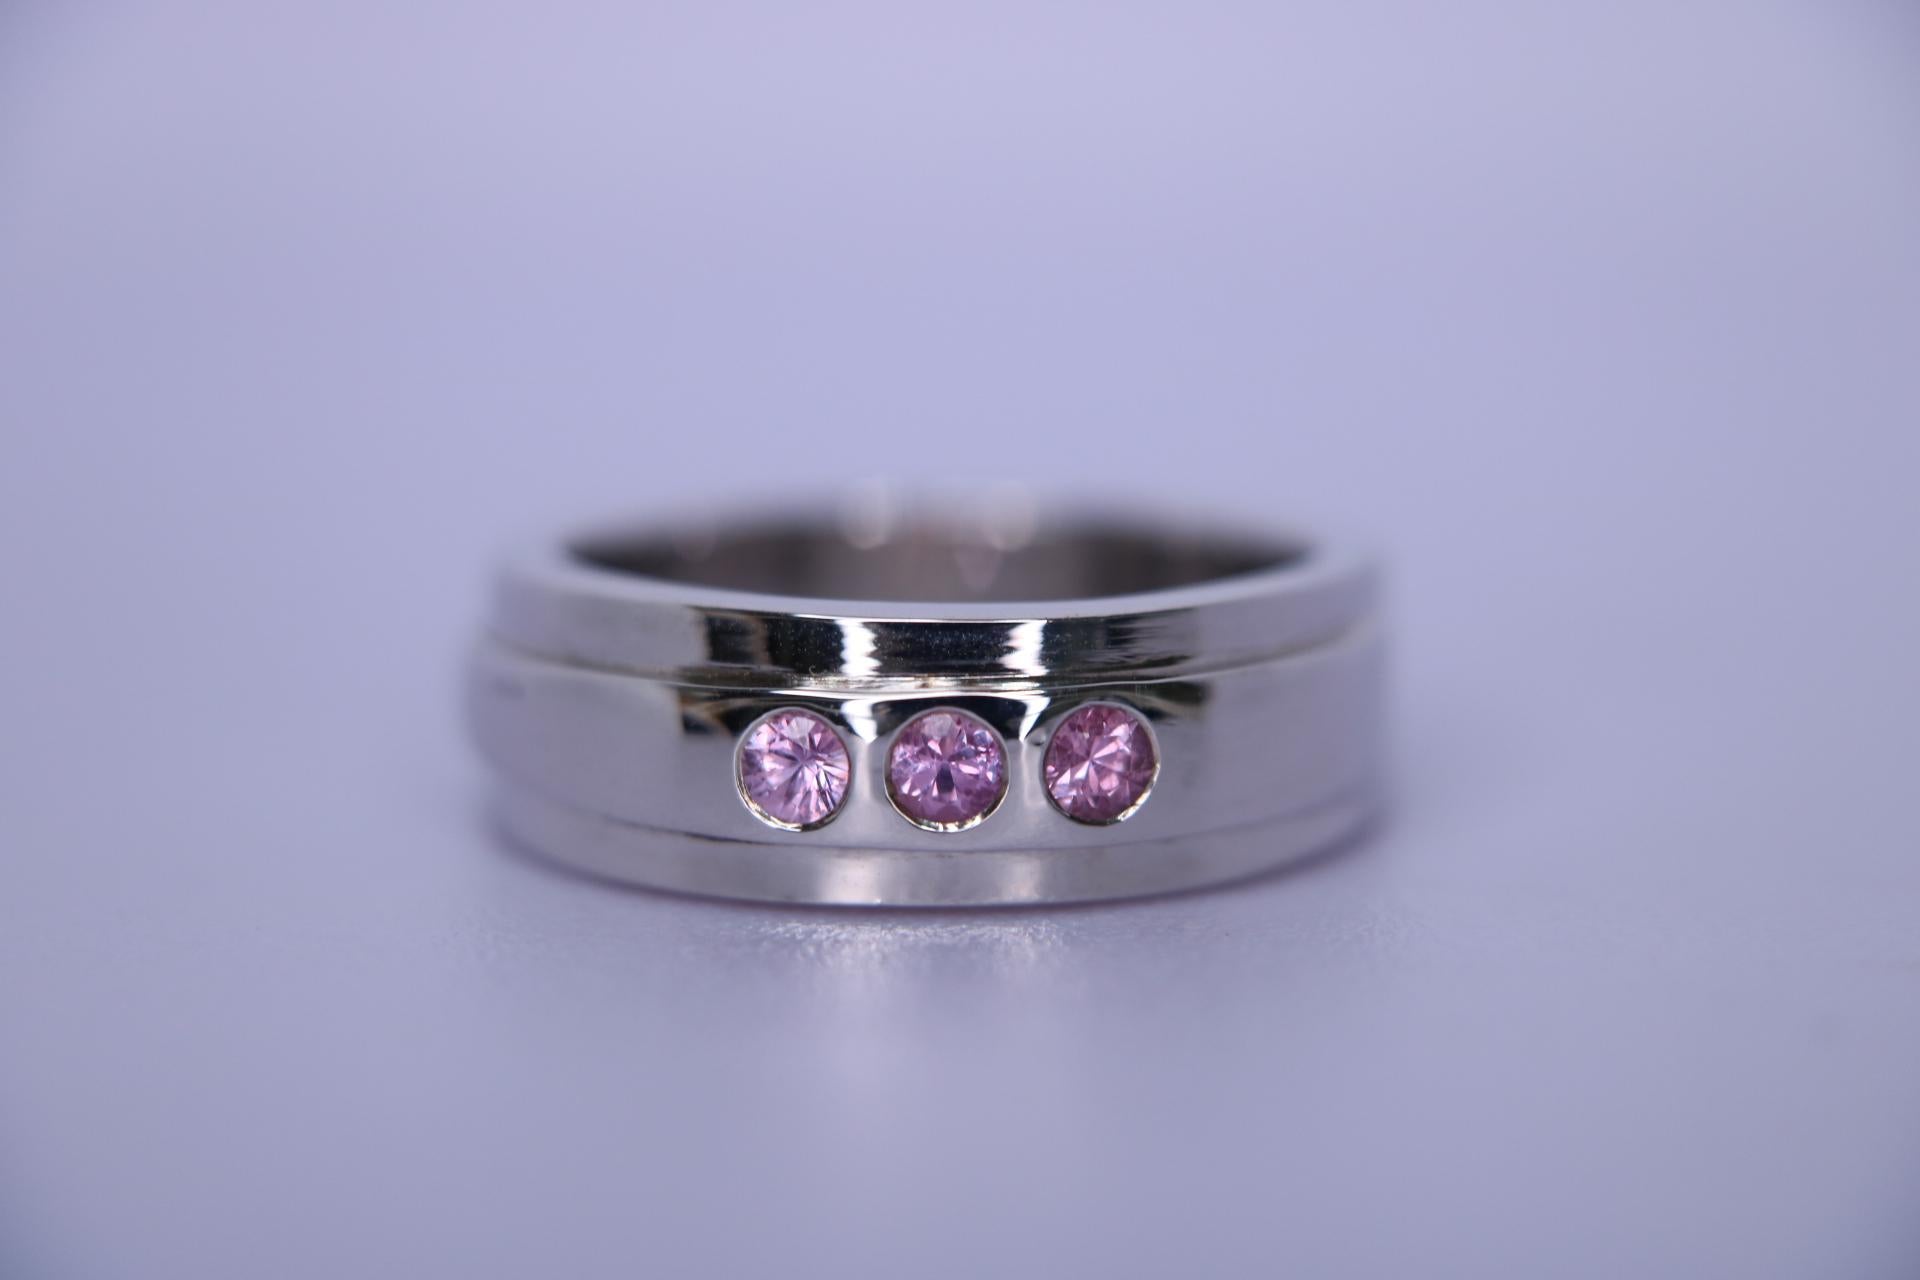 Orloff of Denmark; Fancy Pink Sapphire ring fashioned out of 925 Sterling Silver.

This handmade sterling silver ring features a trio of 2.8mm pink sapphires, delicately set to add a touch of color. The craftsmanship reflects a personal touch, with